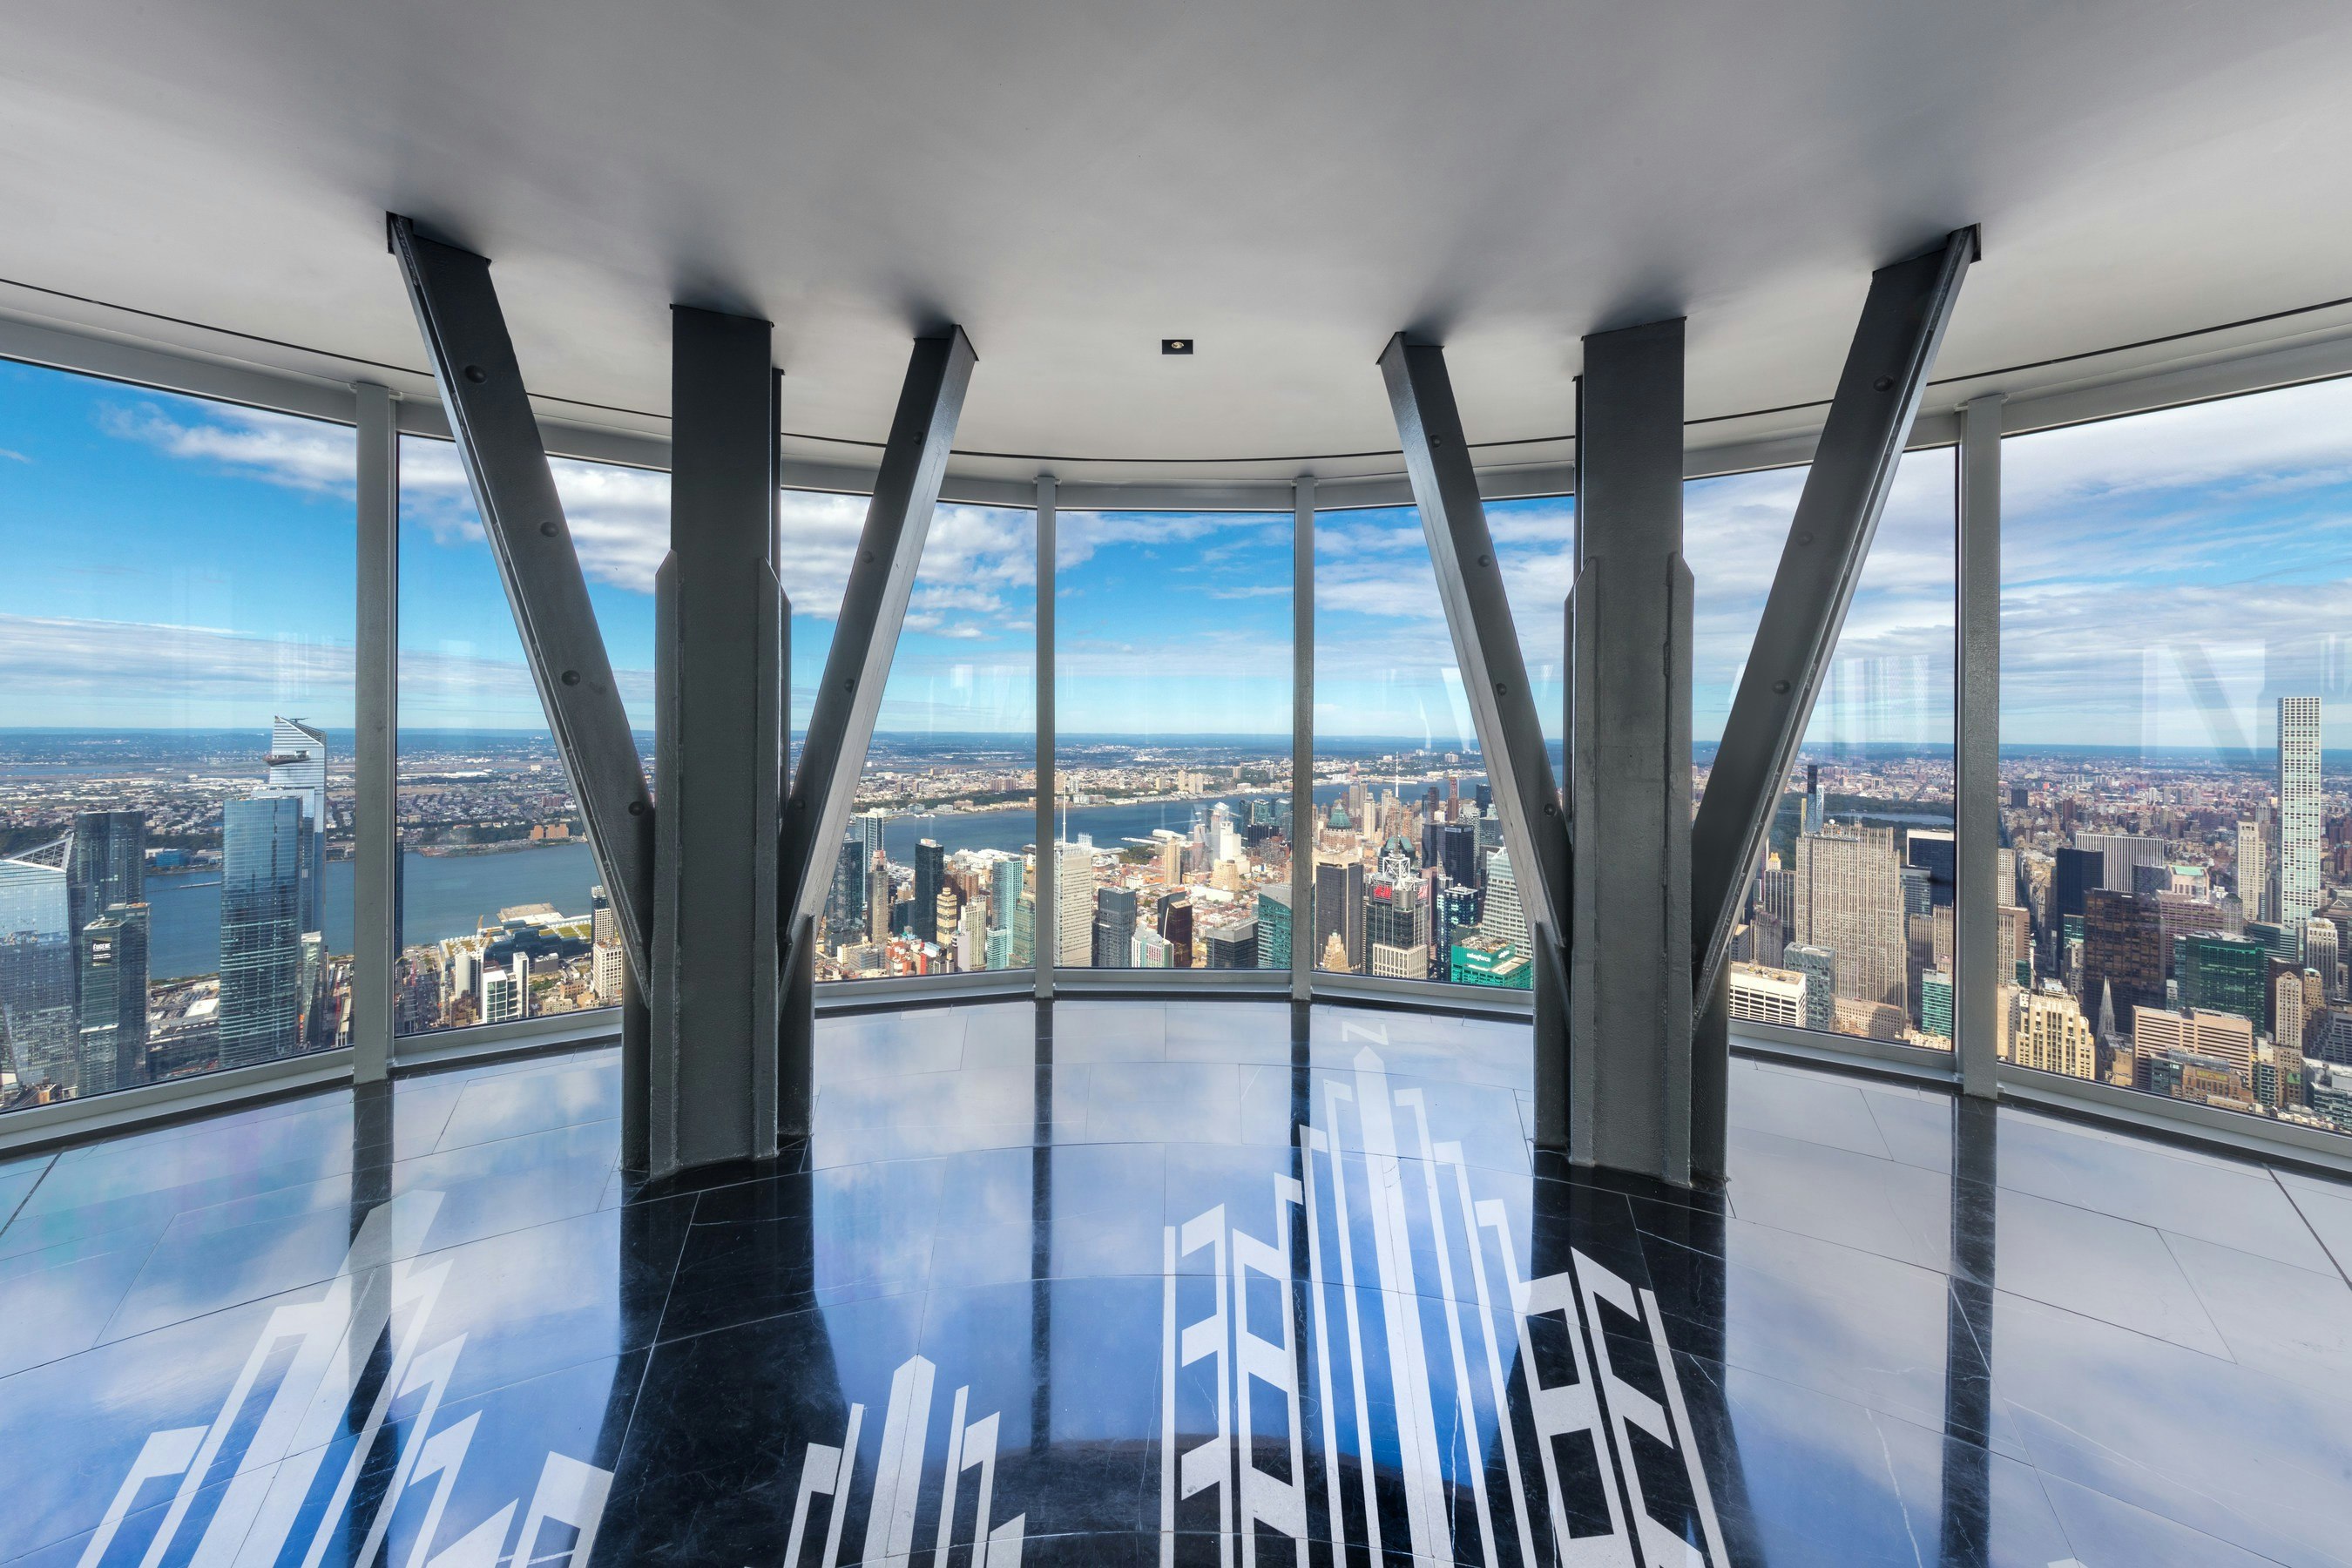 The newly-renovated 102nd floor Observatory at the Empire State Building